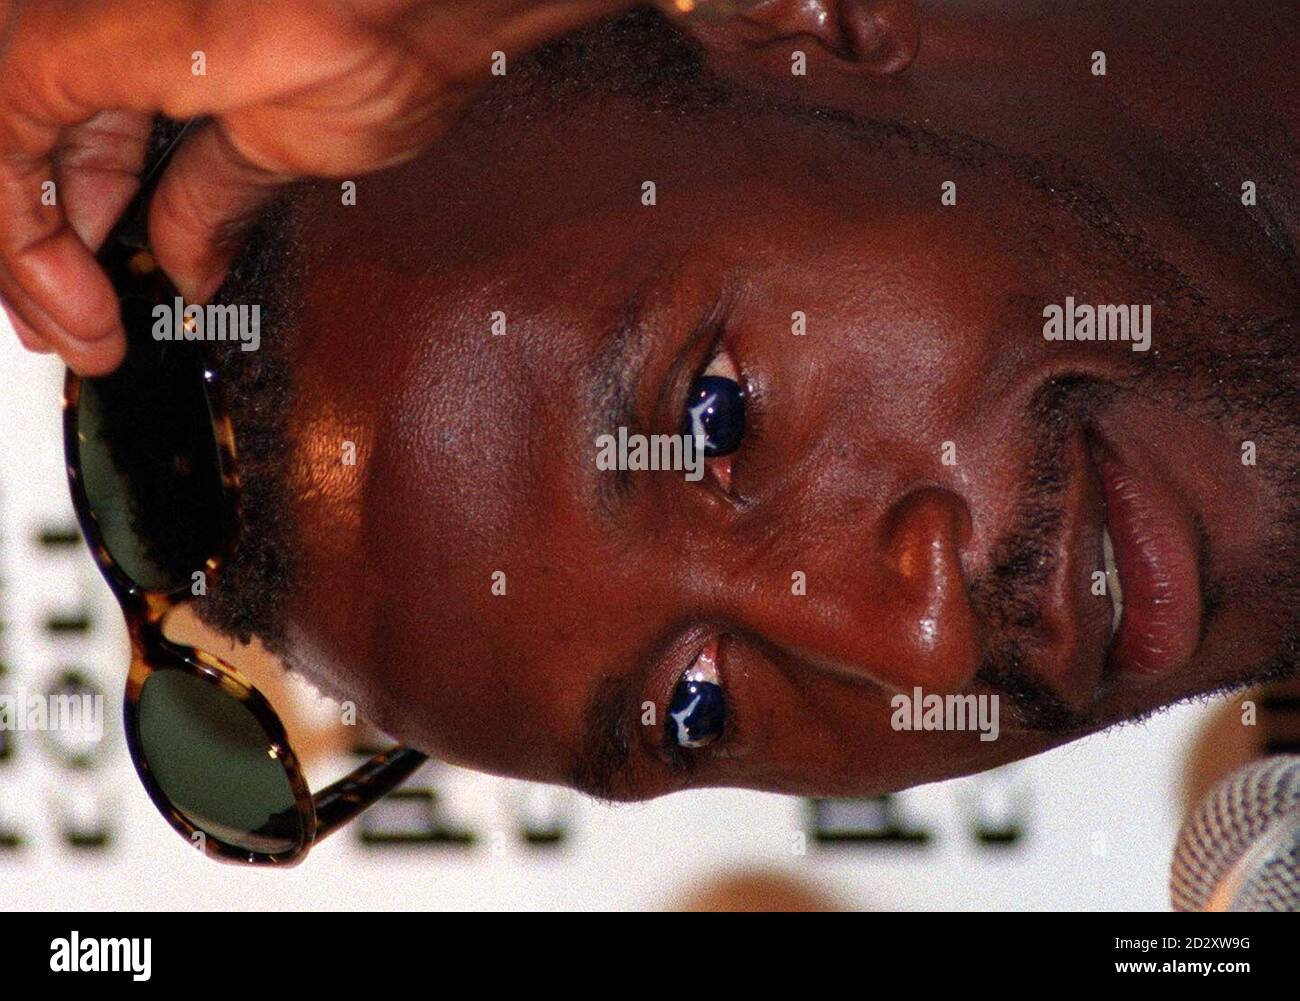 Bkritish Linford Christie lifts his sunglasses to reveal a pair of Puma contact lenses during a news conference in Atlanta this morning (Thursday). Photo by John Giles/PA Stock Photo - Alamy